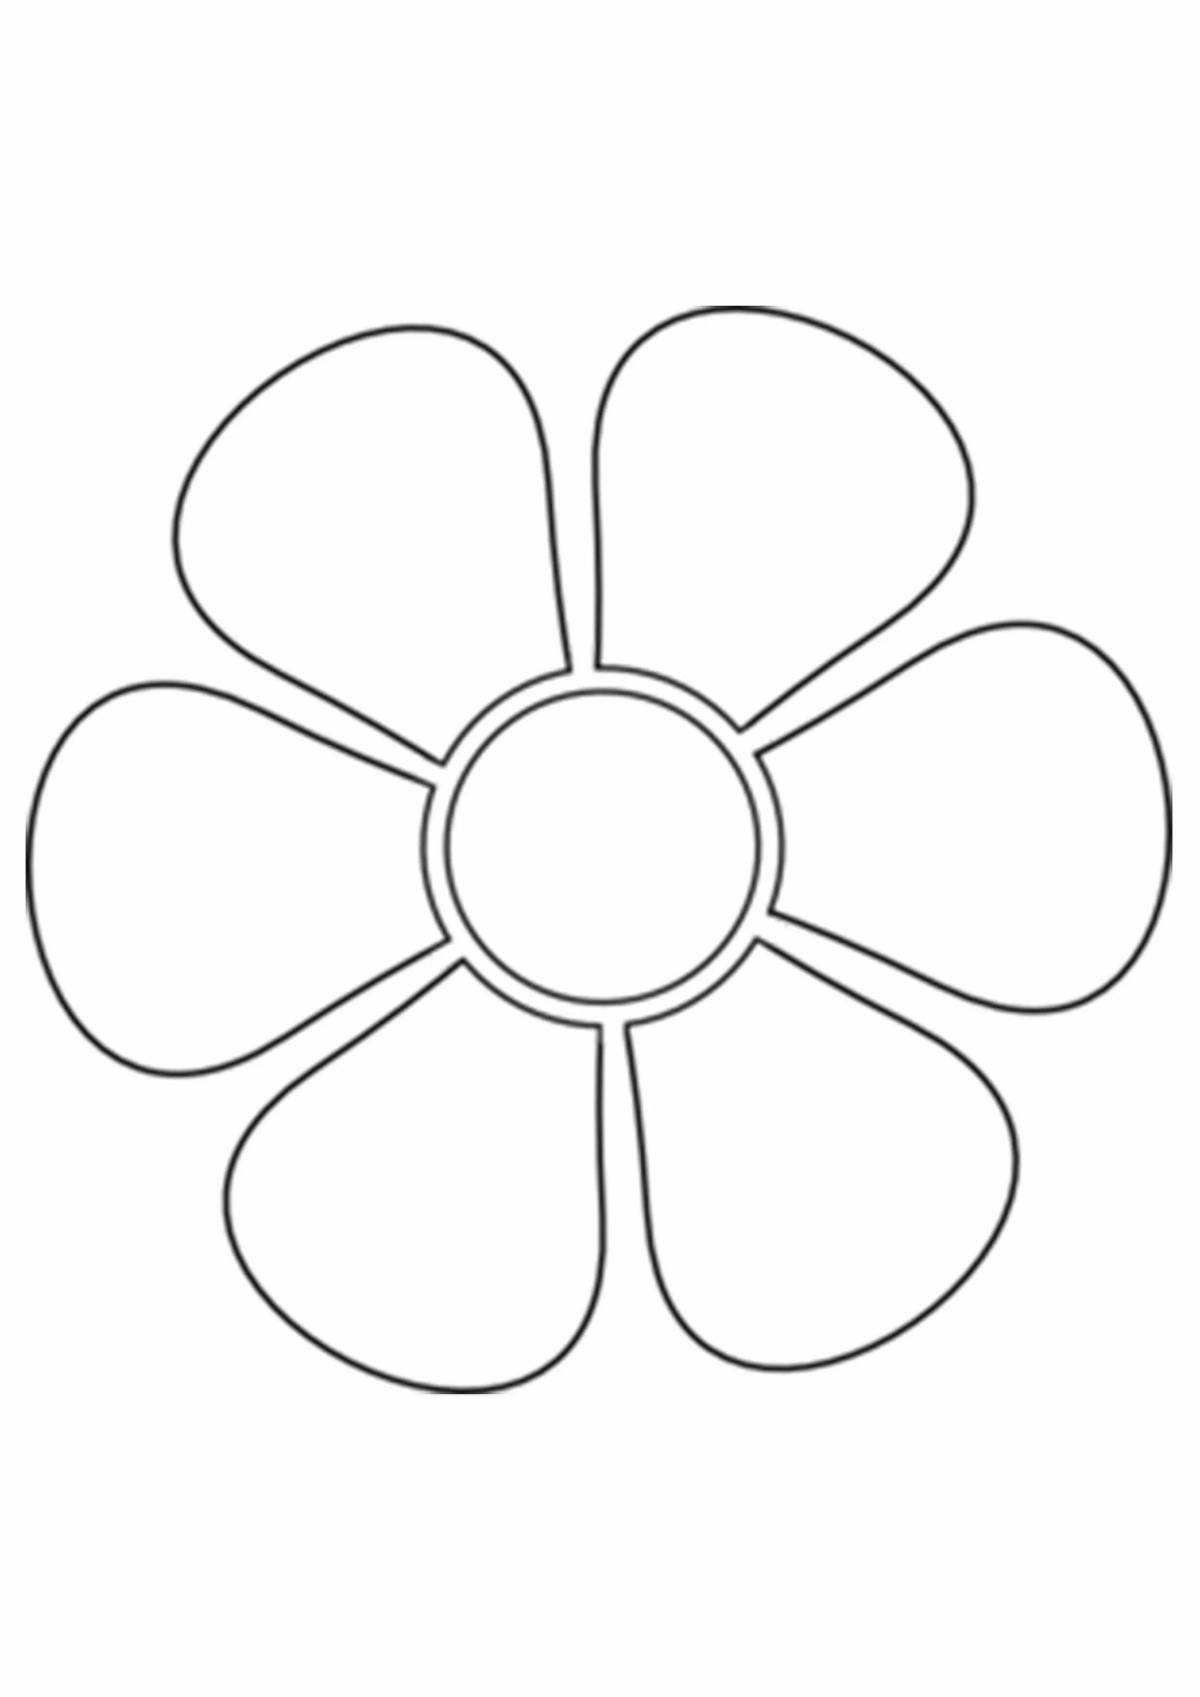 Glorious seven-flower coloring book